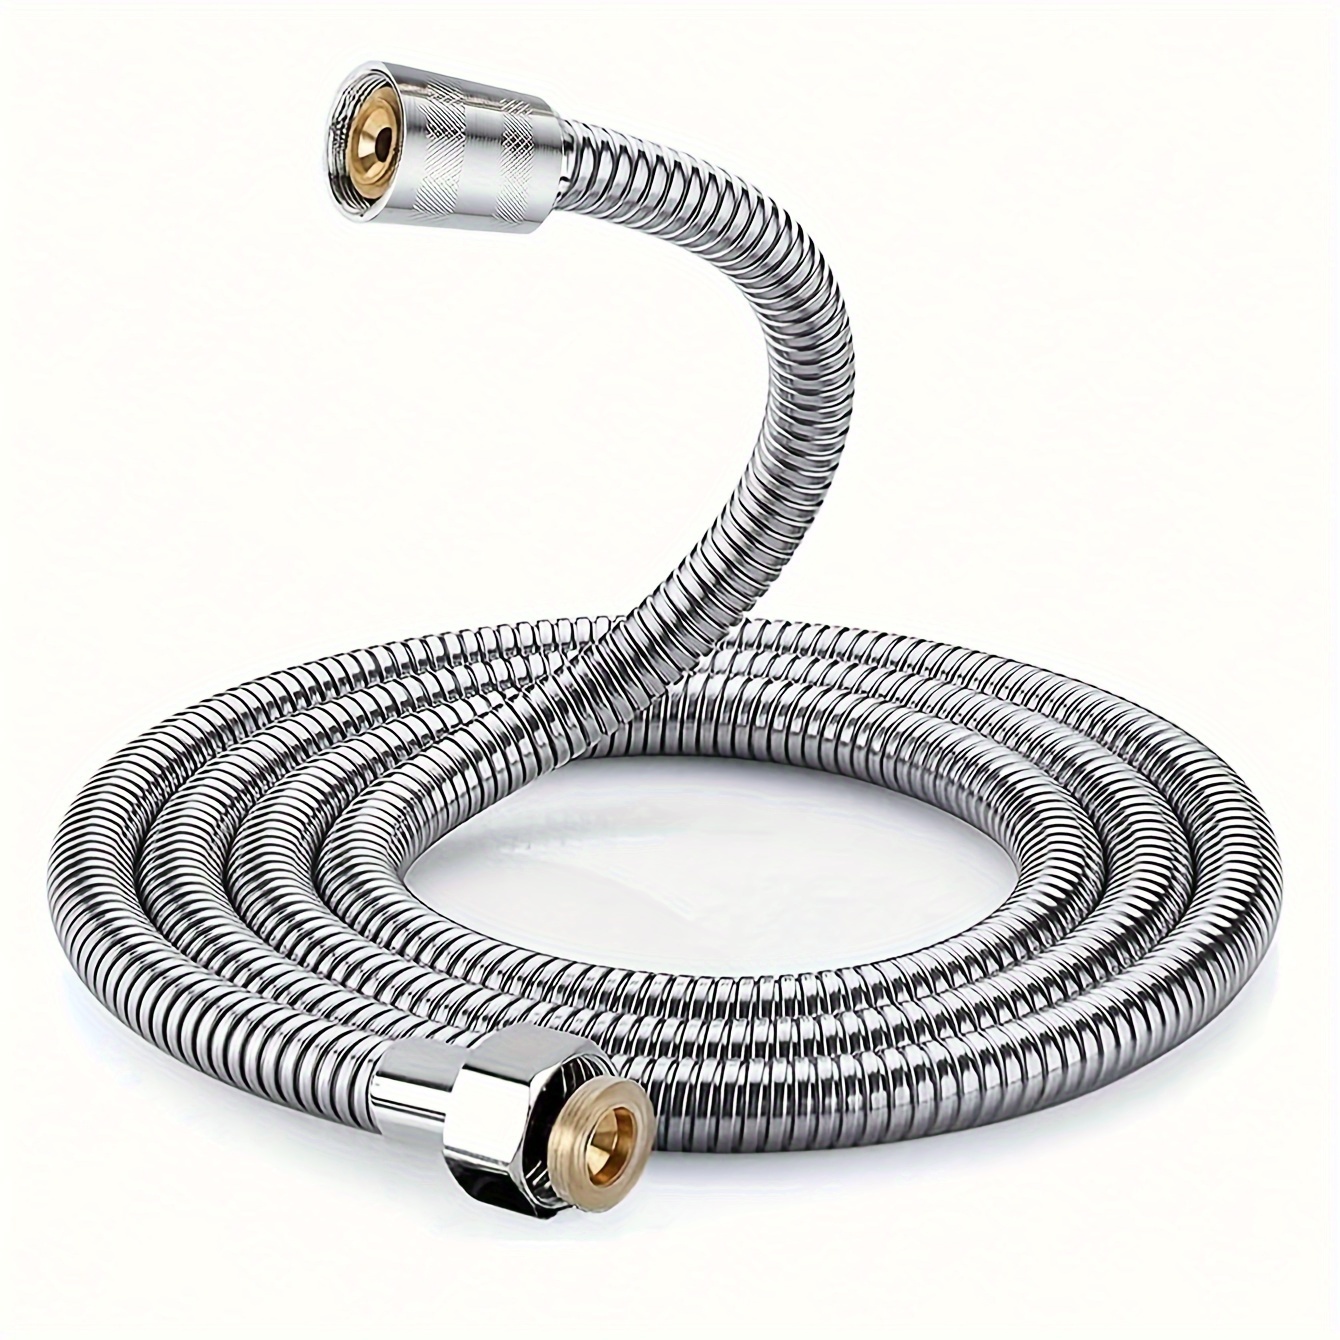 

1pc 2m/78.74inch Encrypted Pipe, Bathroom Water Heater Bath Water Pipe, 2 Meters Stainless Steel Explosion-proof Shower Hose, Rain Spray Head Shower Hose, Ss, Bathroom Accessories